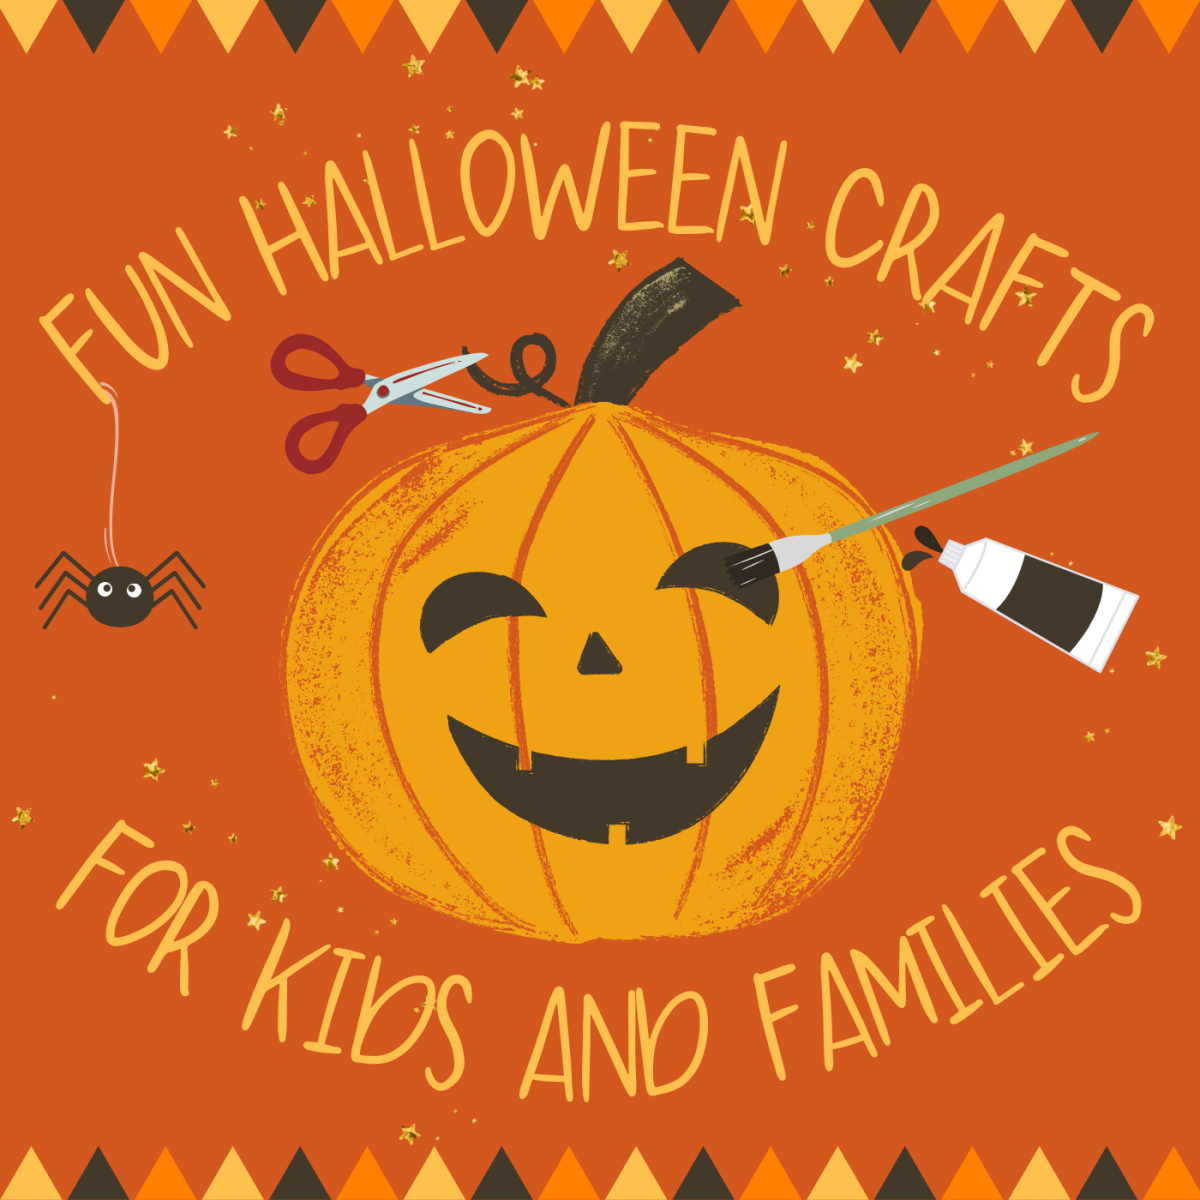 20 Easy Halloween Crafts for Kids and Families to Make